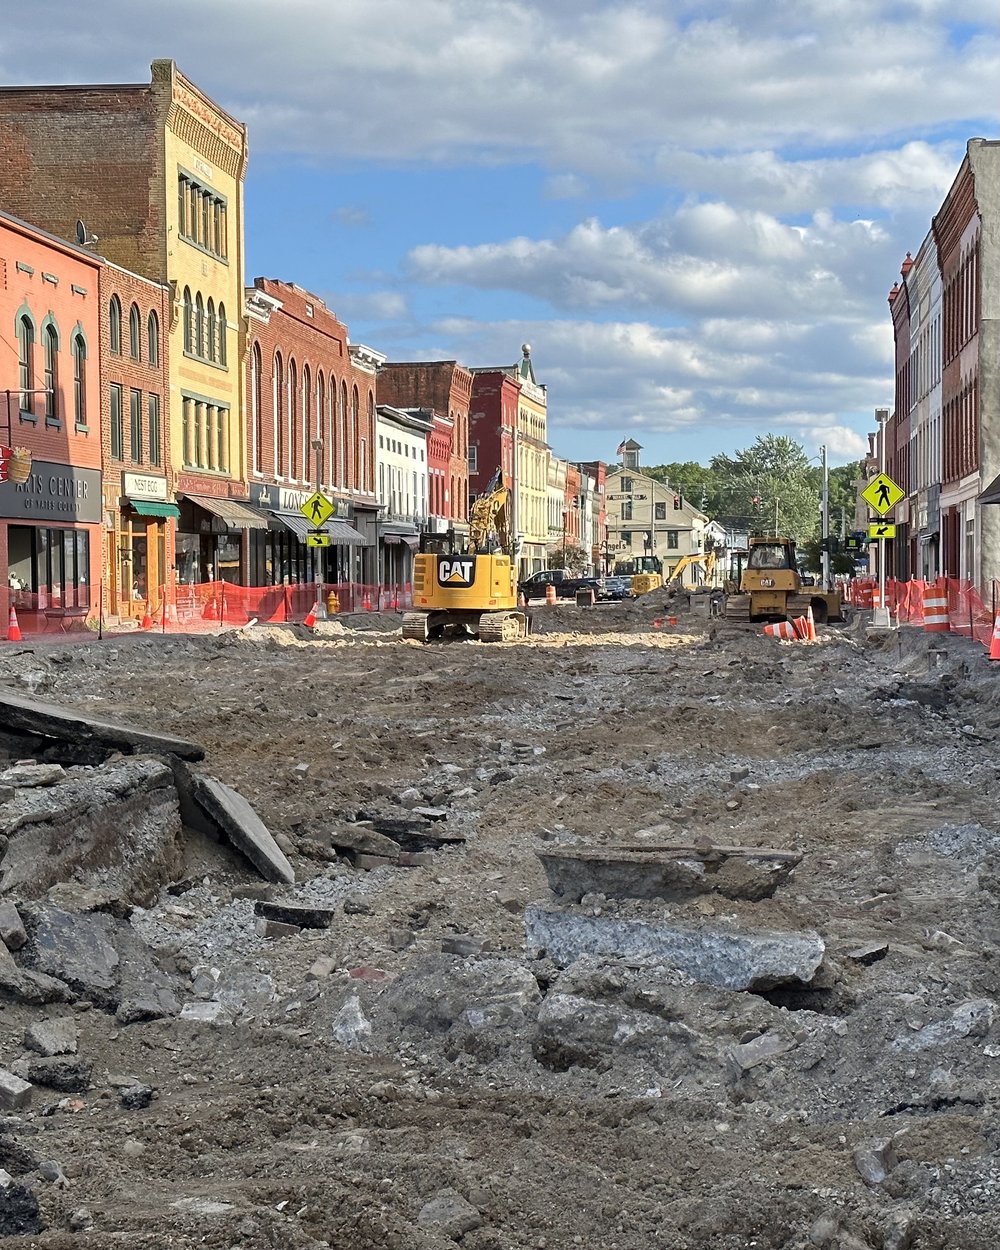 In an interesting "Trick-or-treat" the local authorities decided to dig up Main Street exposing d...